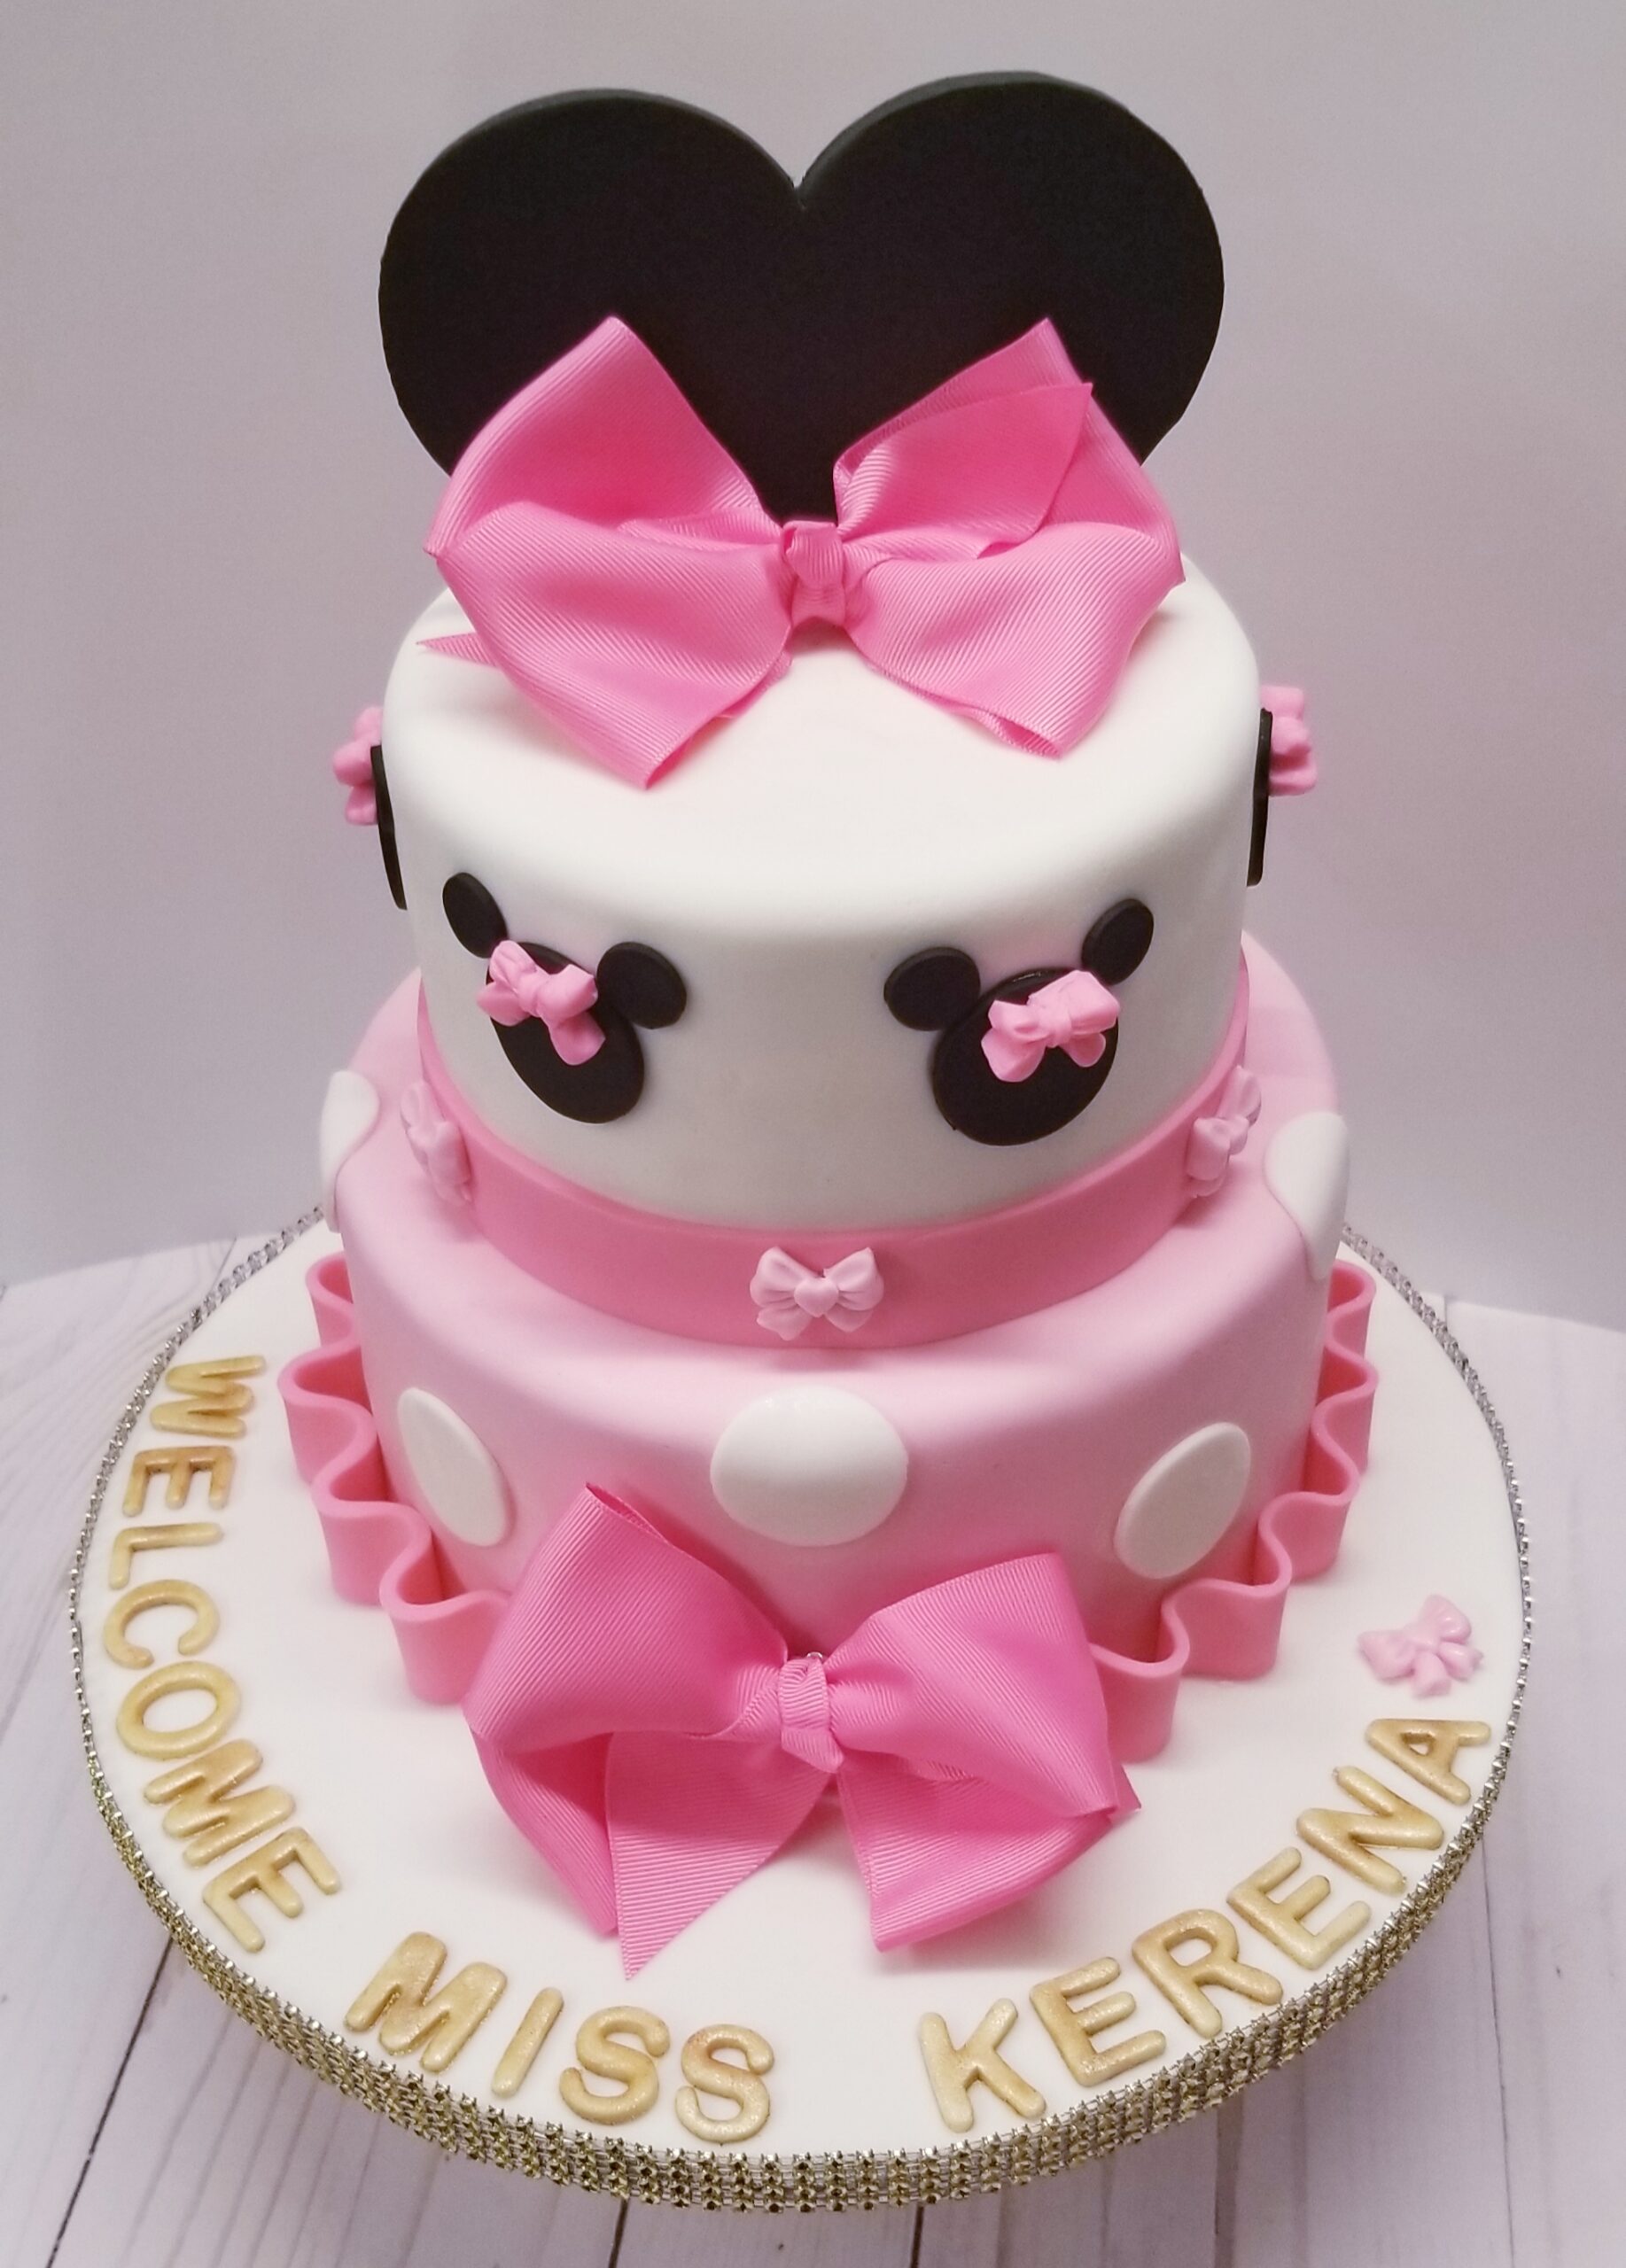 https://dreammakerbakers.com/wp-content/uploads/2021/04/Pink-Welcome-Cake-Fondant-2-Tier-scaled.jpg